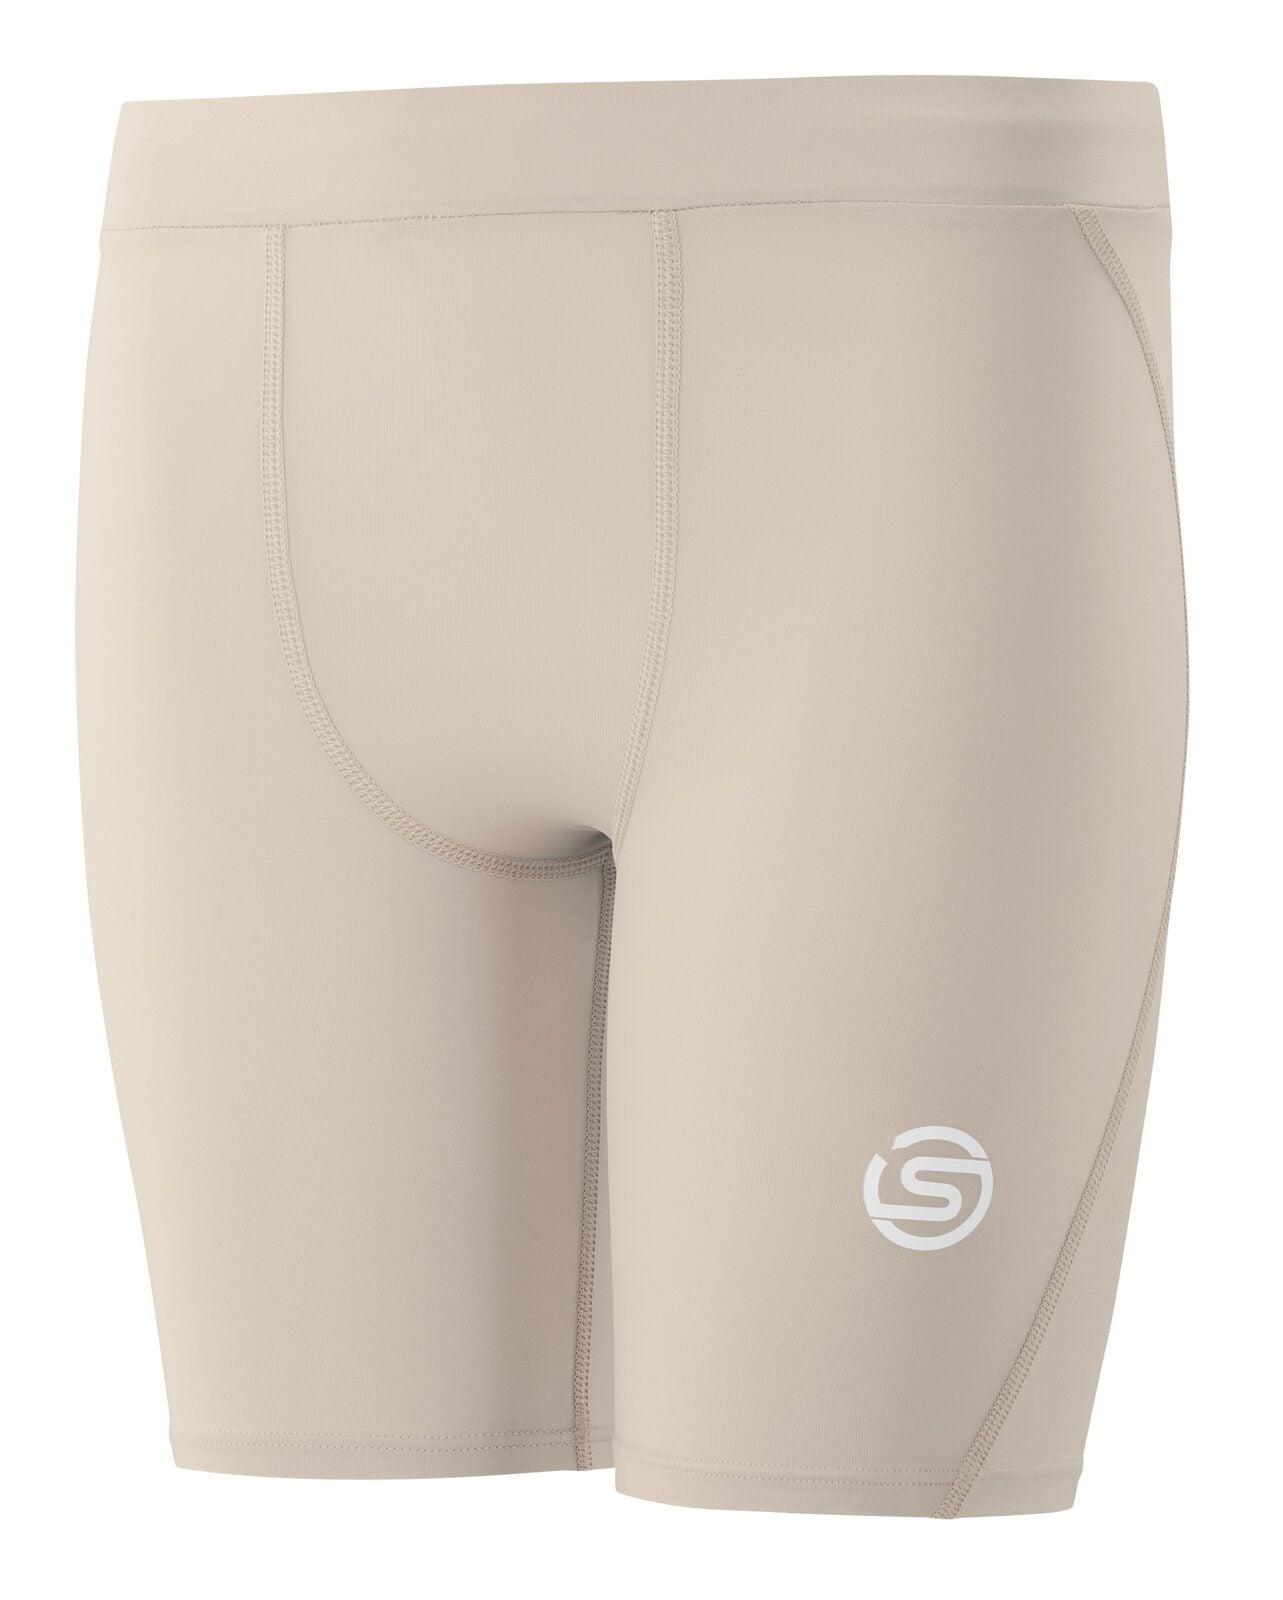 SKINS Compression Unisex Youth Beige Series 1 Half tight Shorts